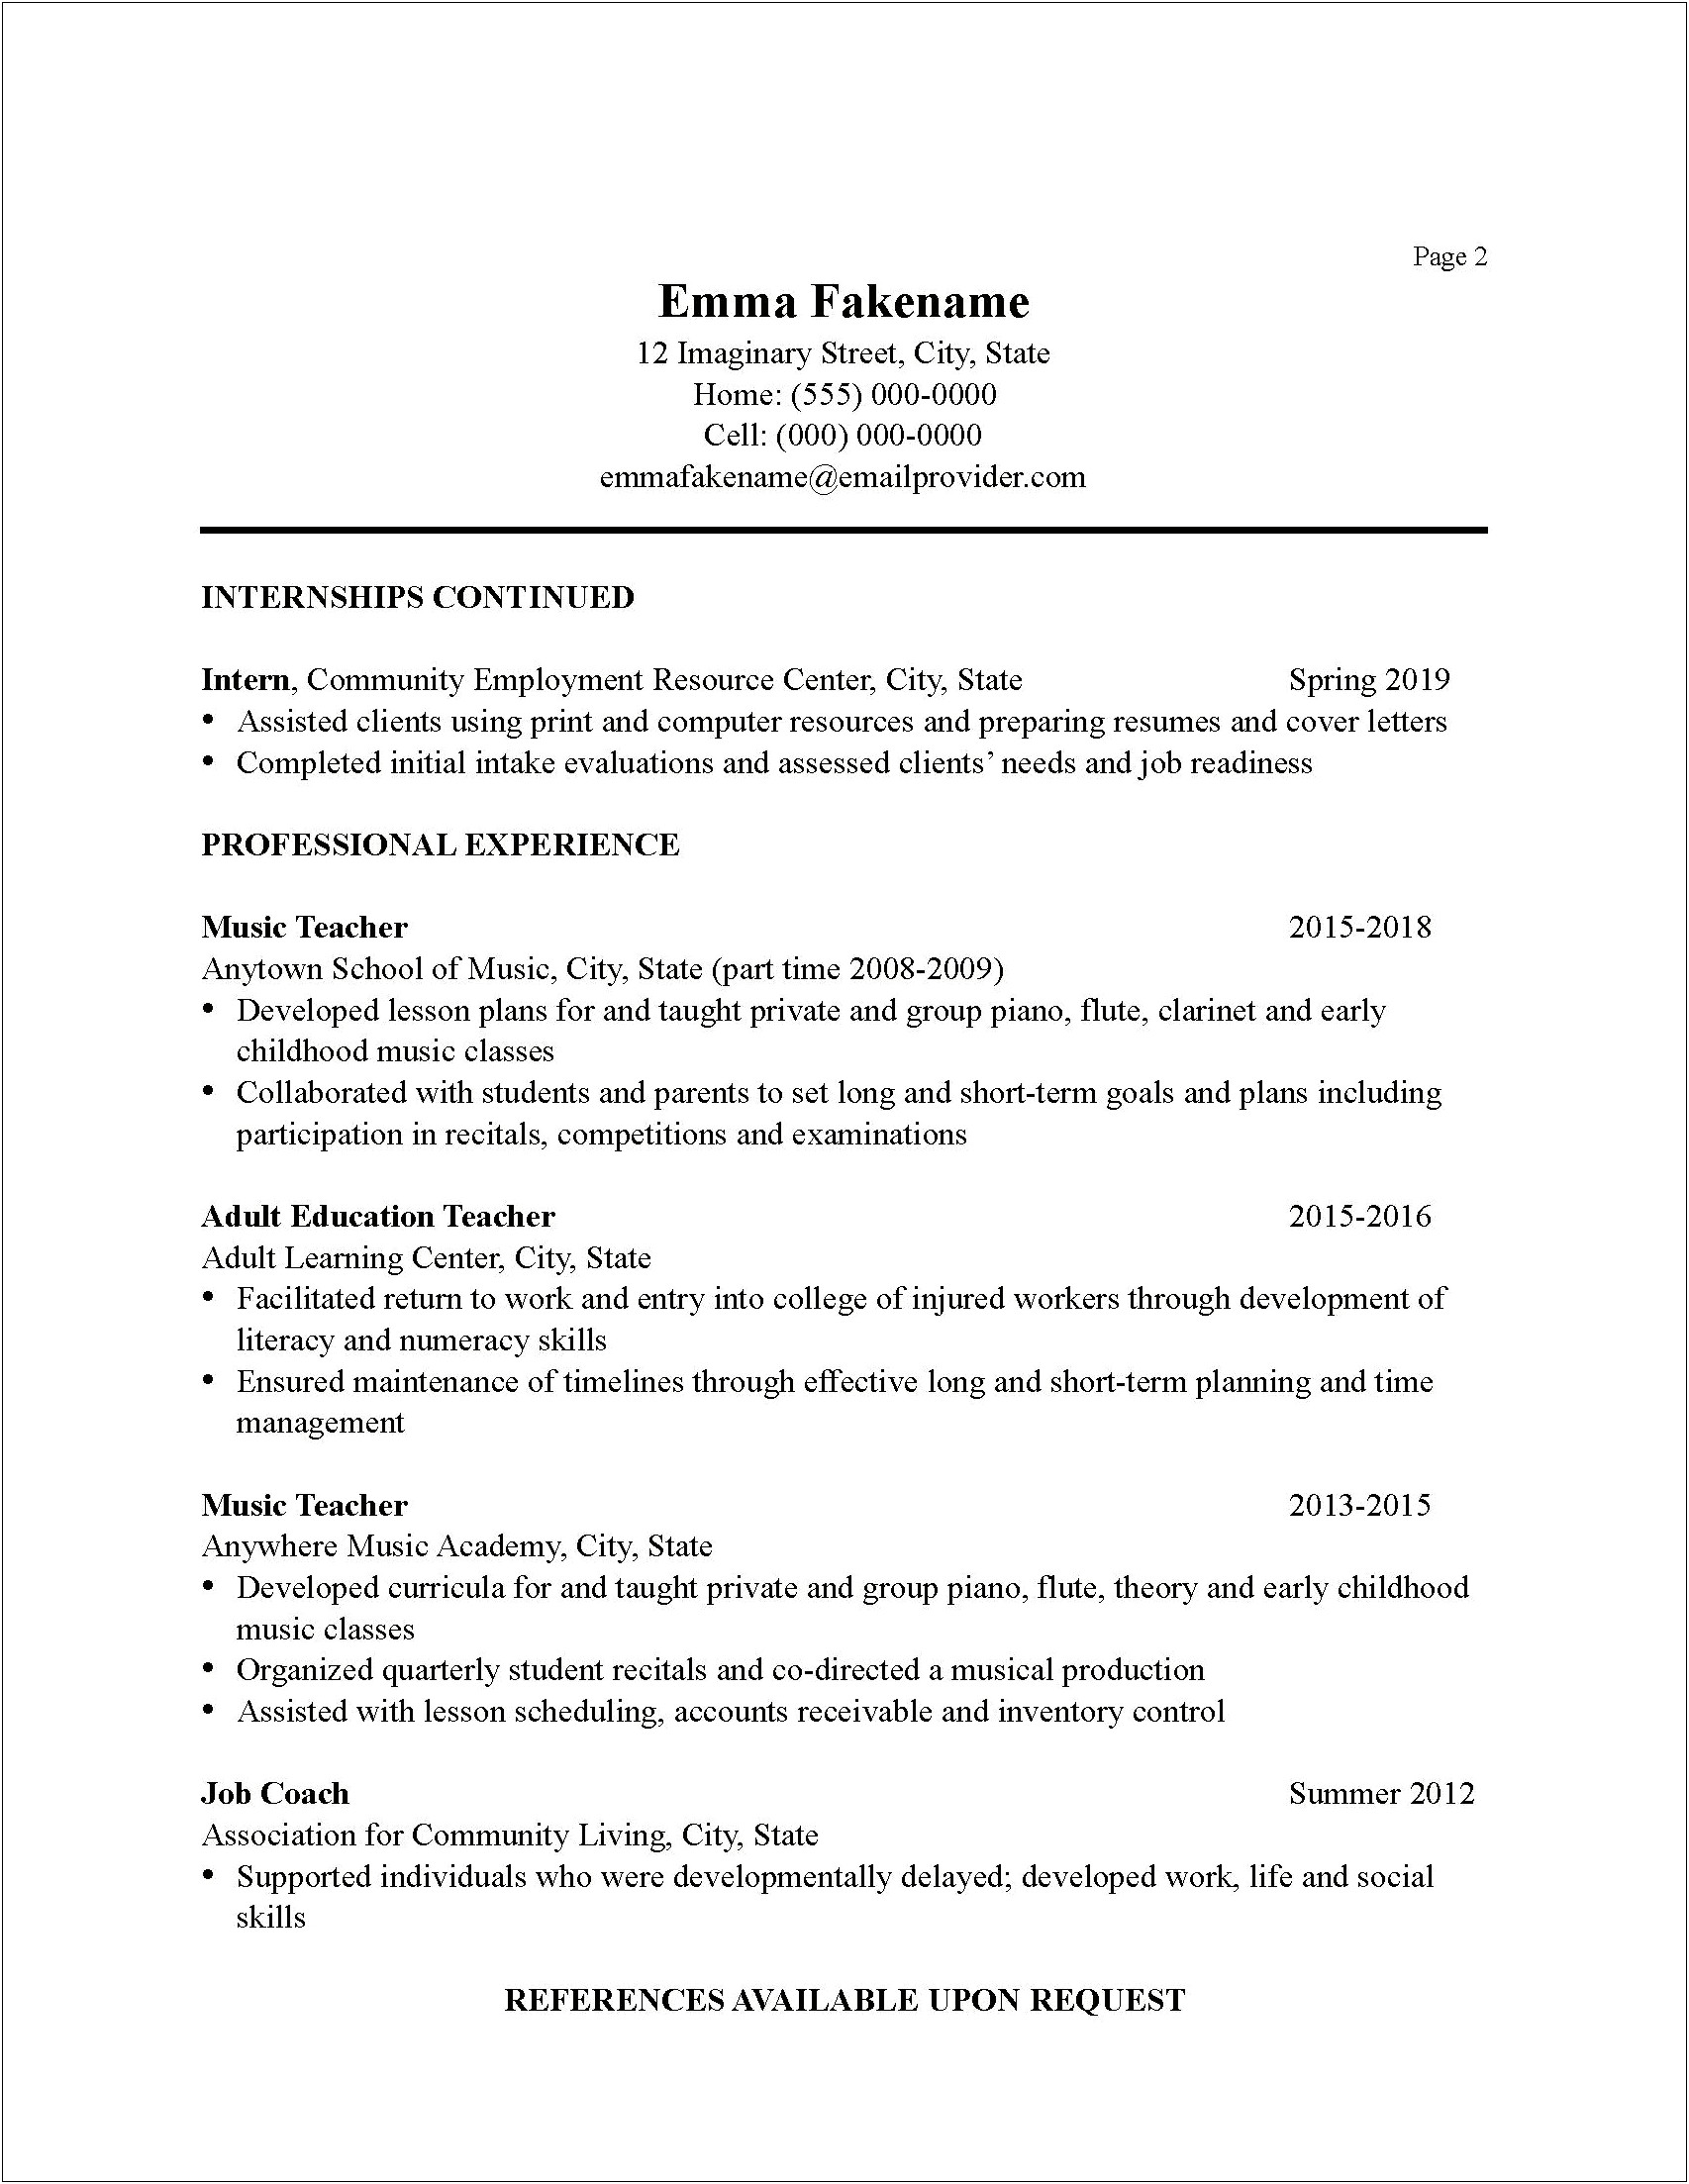 Example Resume Objective For Career Change